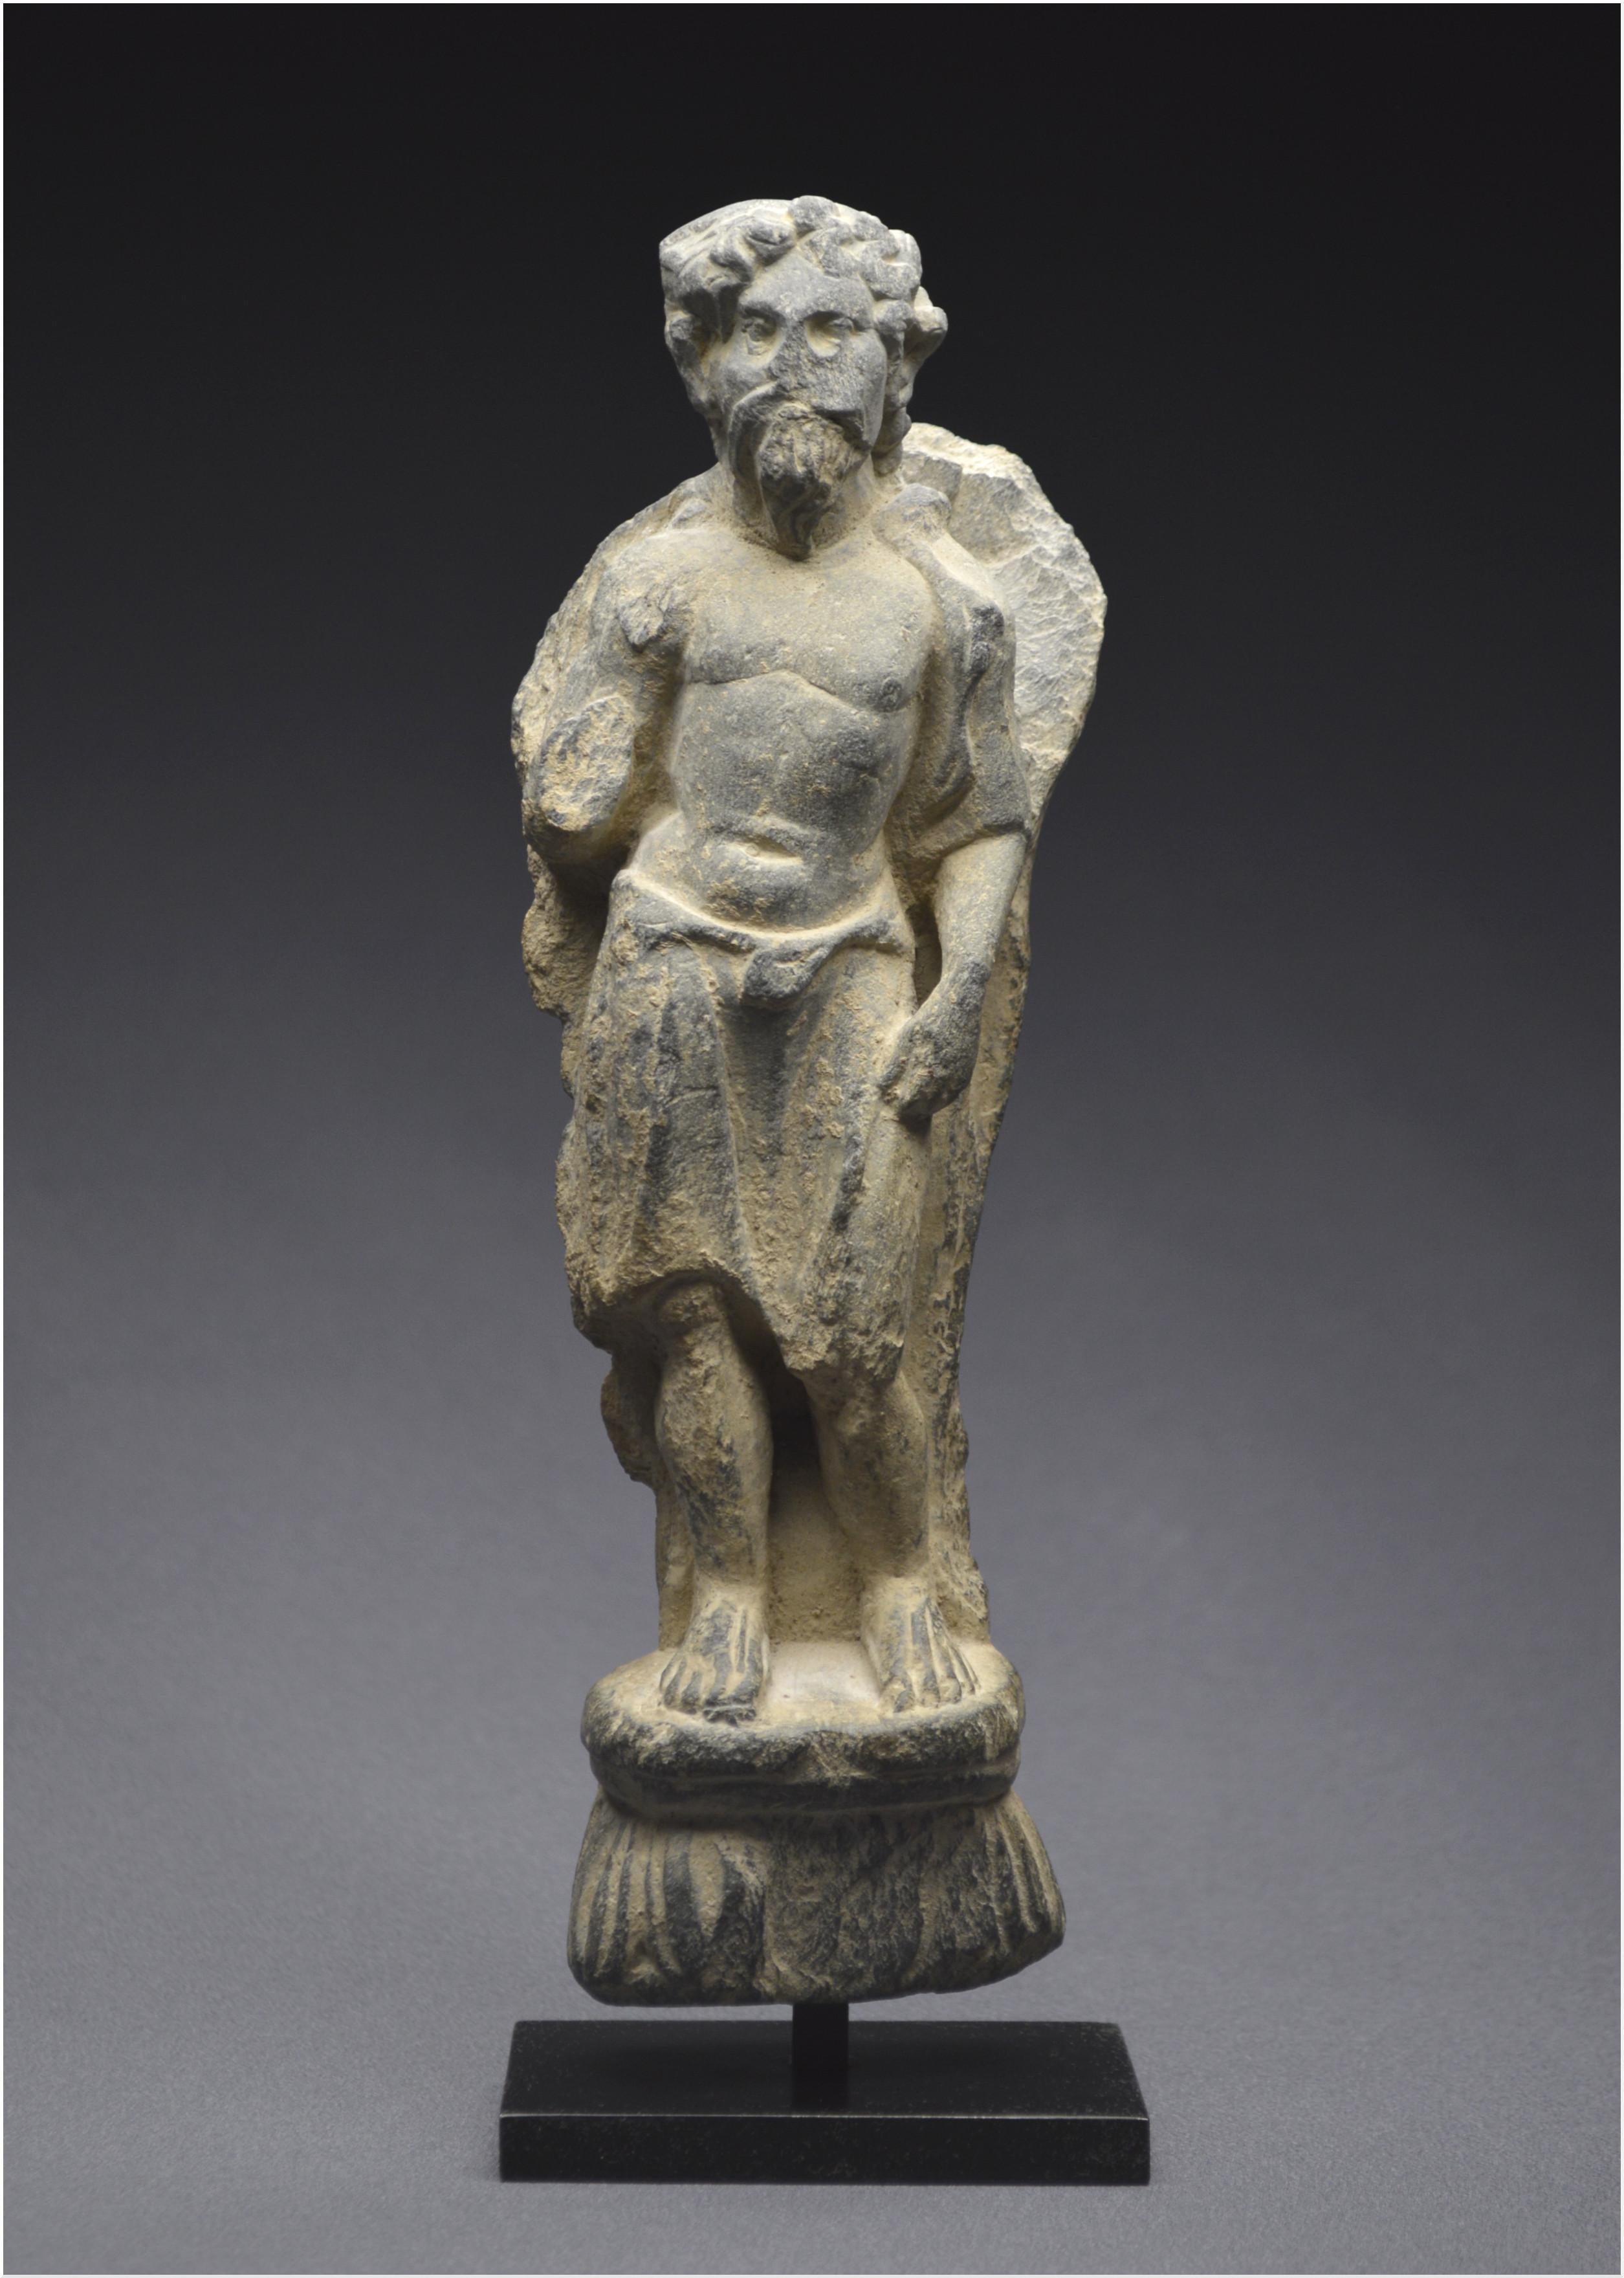 Pakistan / Region of Gandhara
2nd – 4th century AD


Representation of Vajrapani shown standing slightly swaying, the athletic body like a Hercules, the bare chest, the waist surrounded by a cloth. It rests barefoot on an ovoid base surmounting